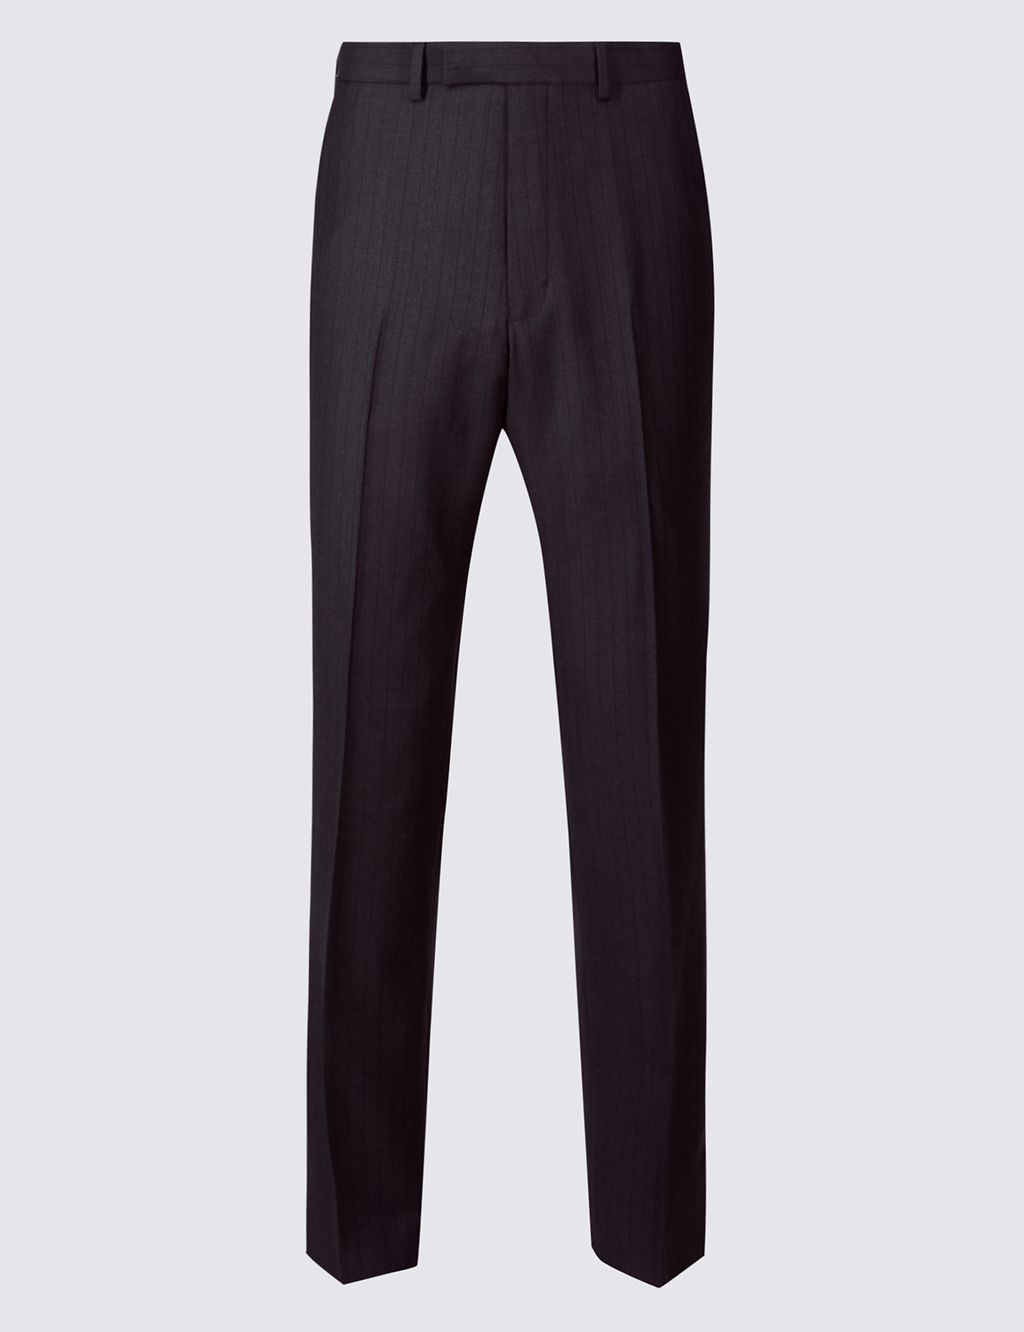 Striped Regular Fit Wool Trousers 1 of 6